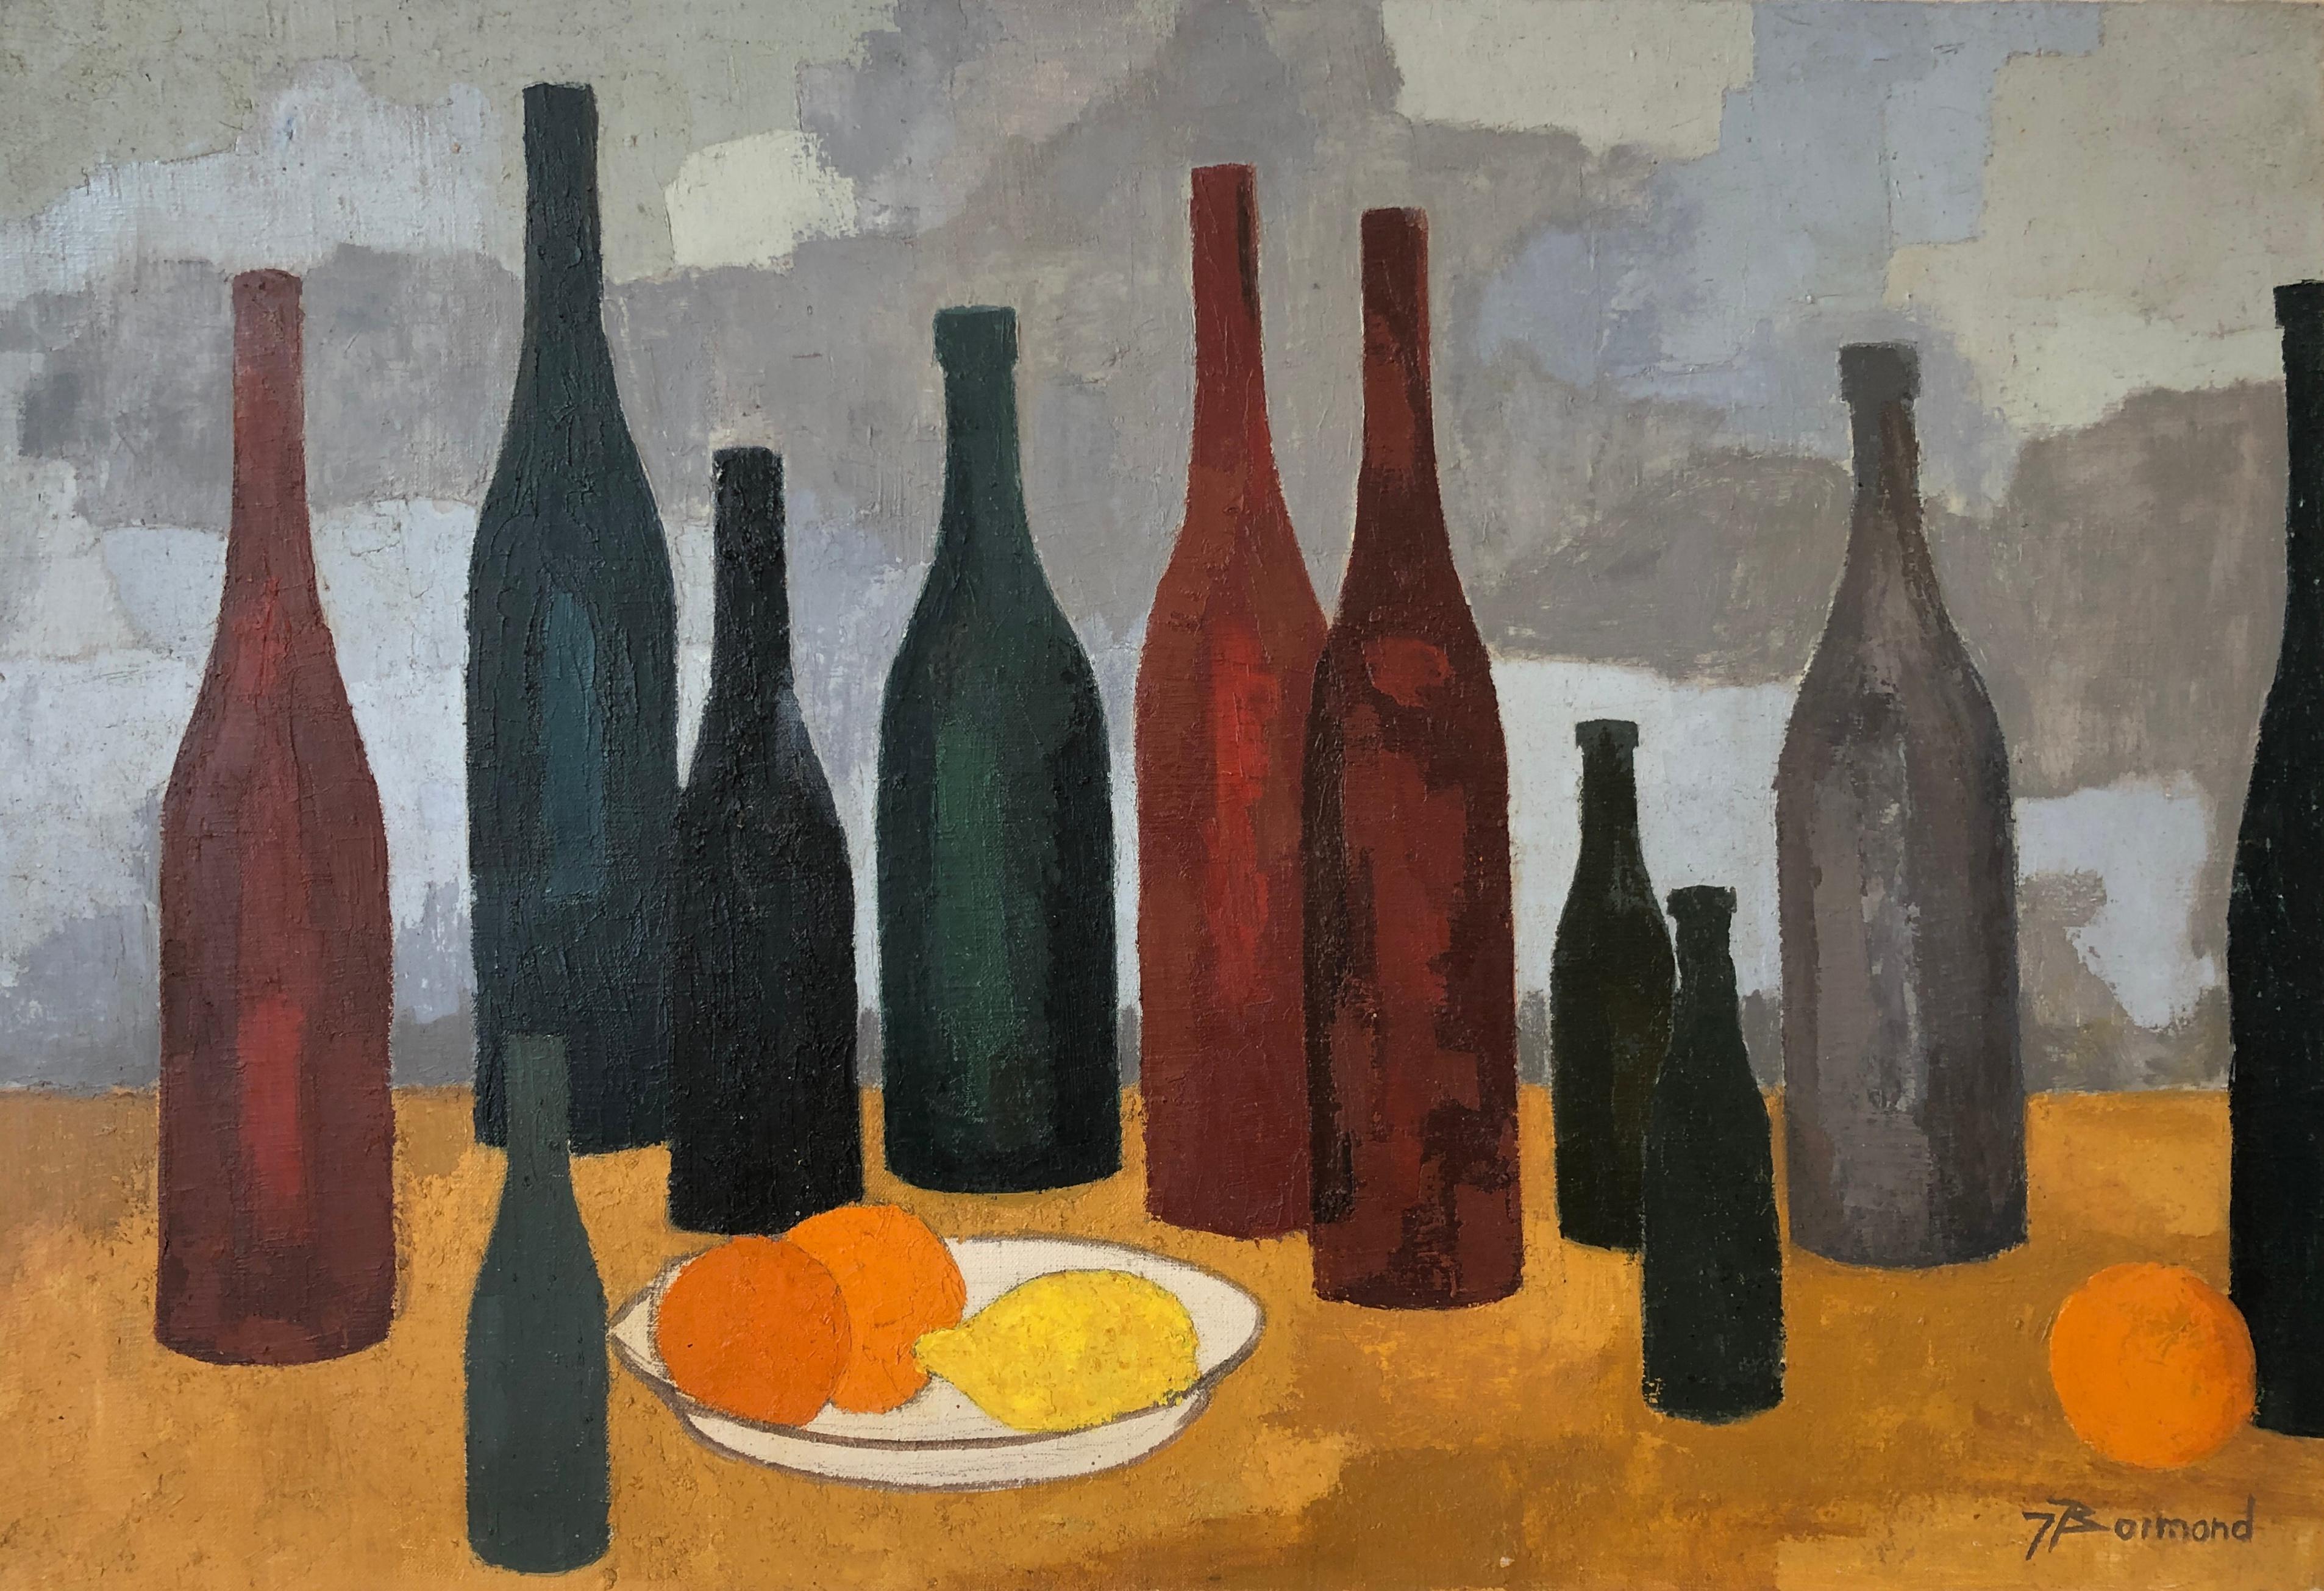 Bottles and cut of oranges and lemon